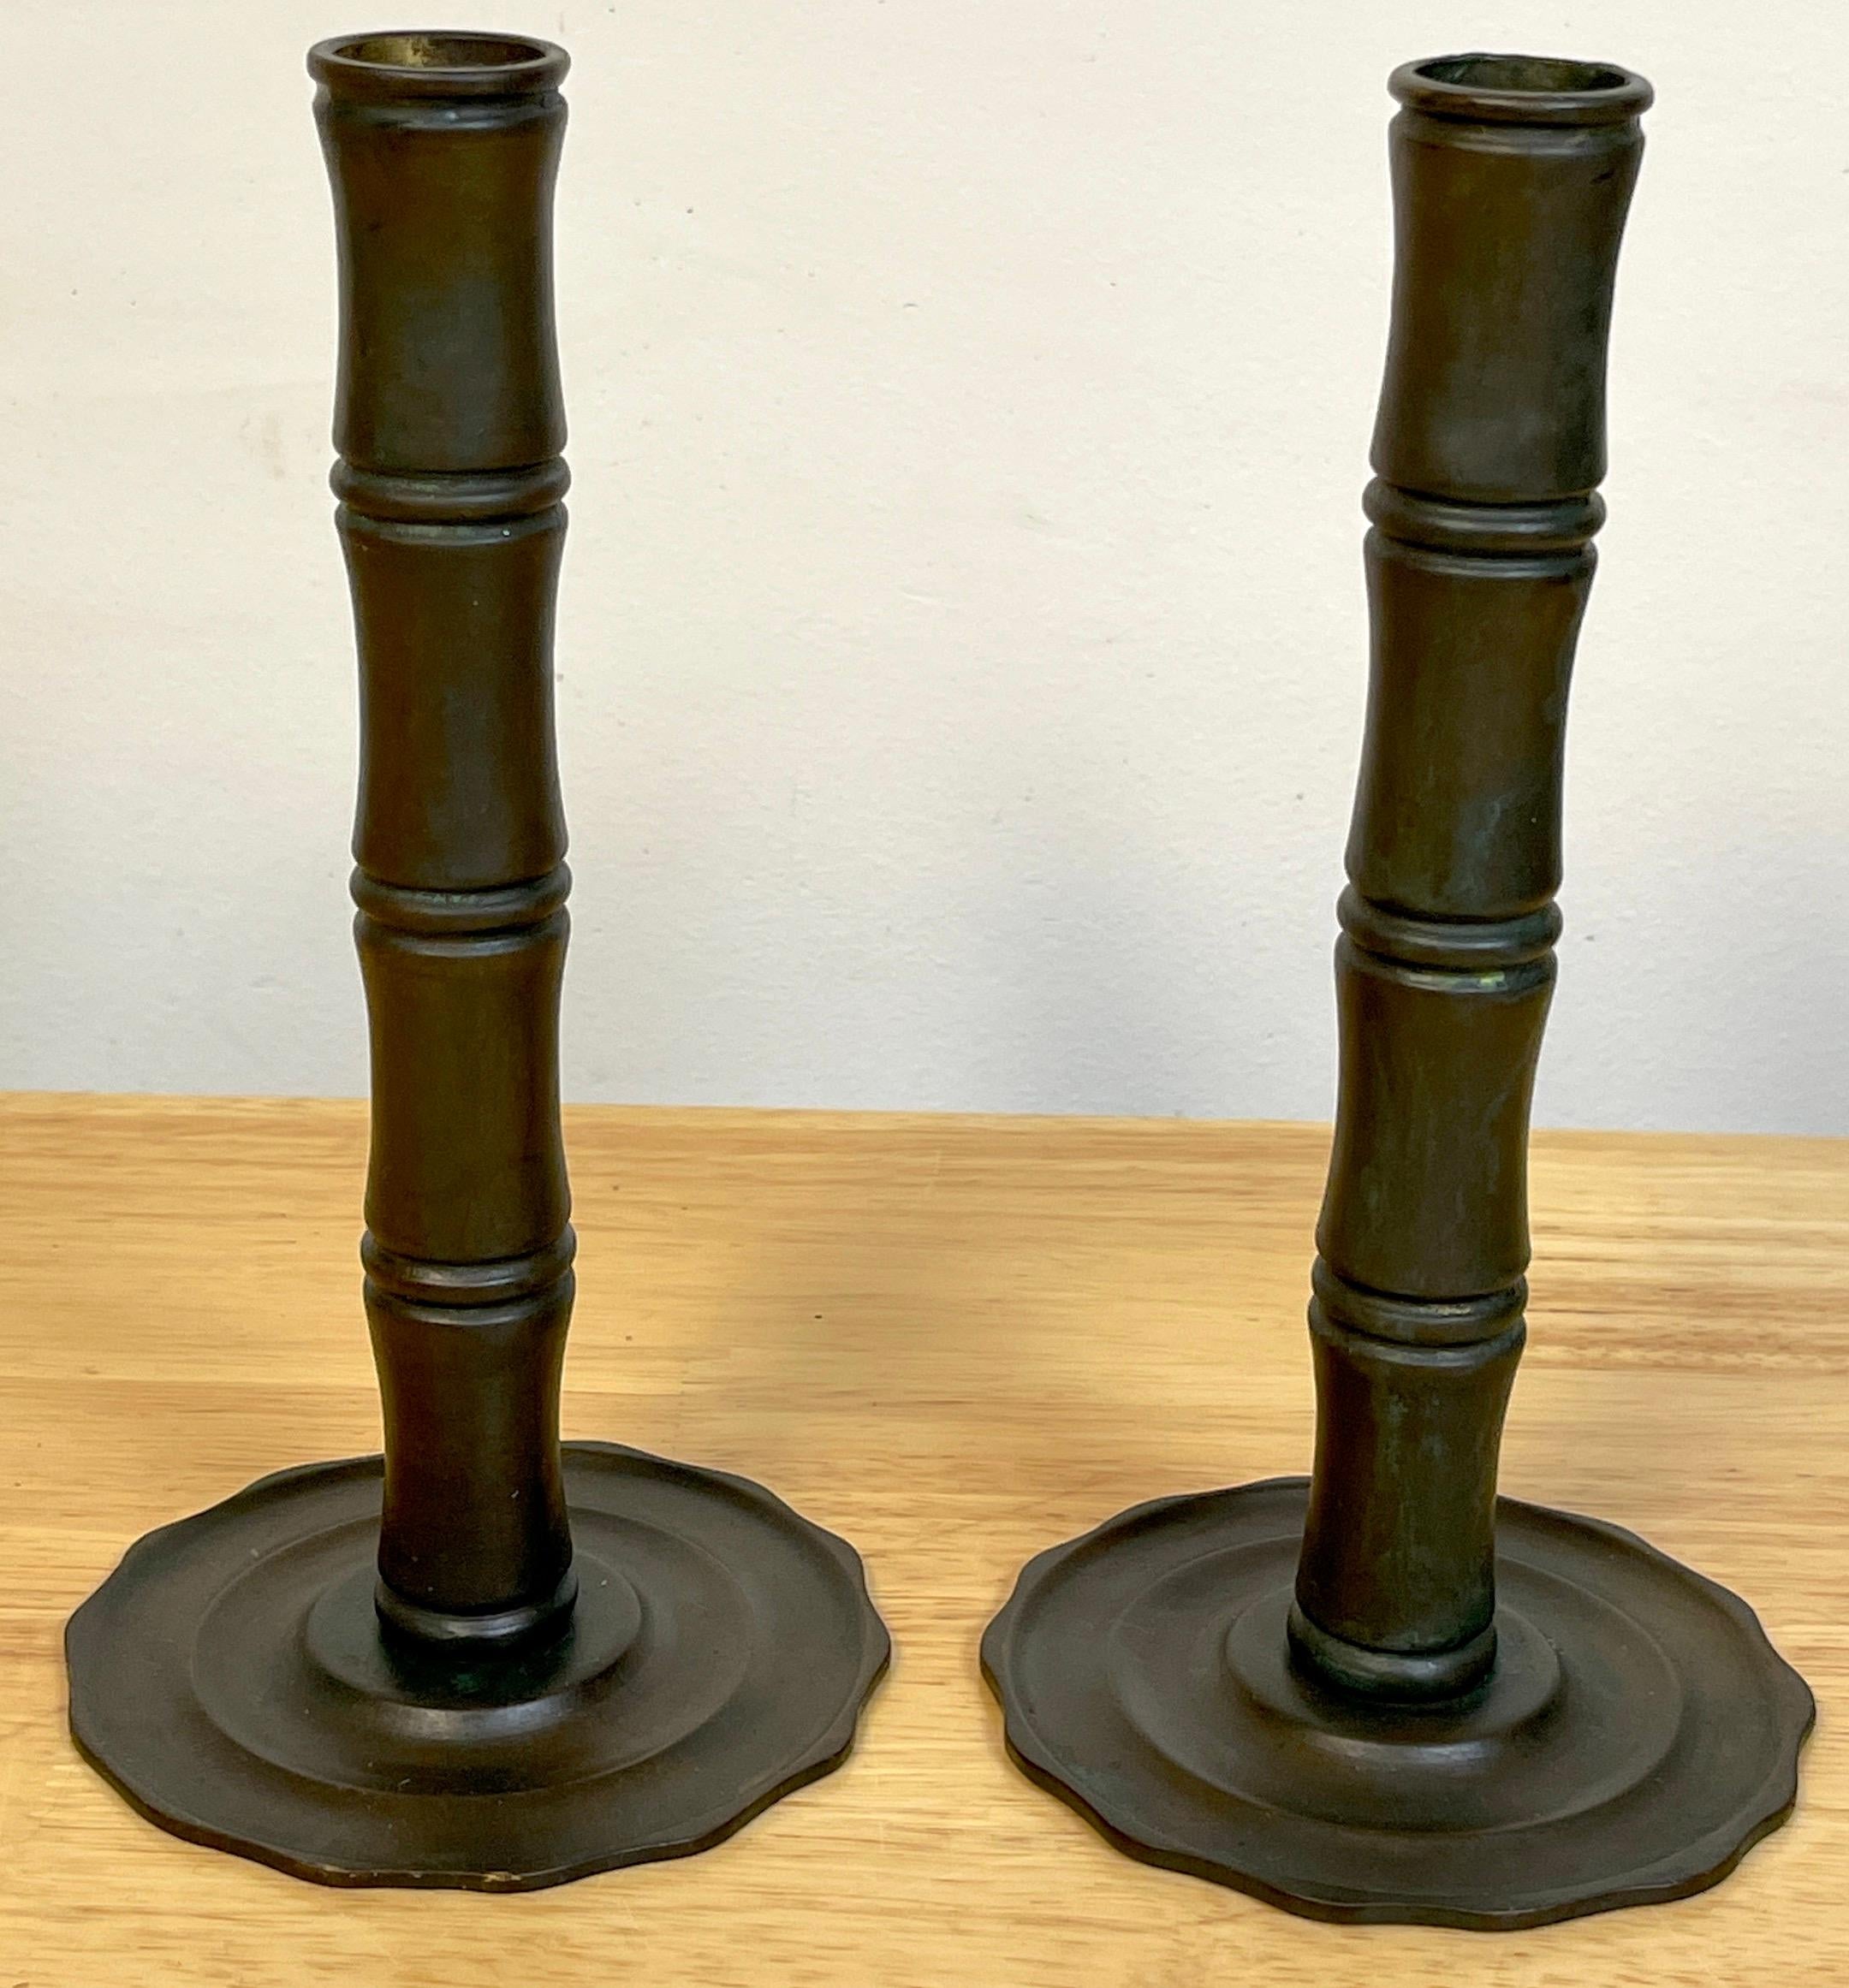 Pair of Tiffany Studios Aesthetic /Japonisme Bamboo Motif Candlesticks
A rare form, hard to find a pair of Tiffany Aesthetic /Japonisme period candlesticks. Each one with cast bamboo column candlestick with a circular scalloped tiered base. Both